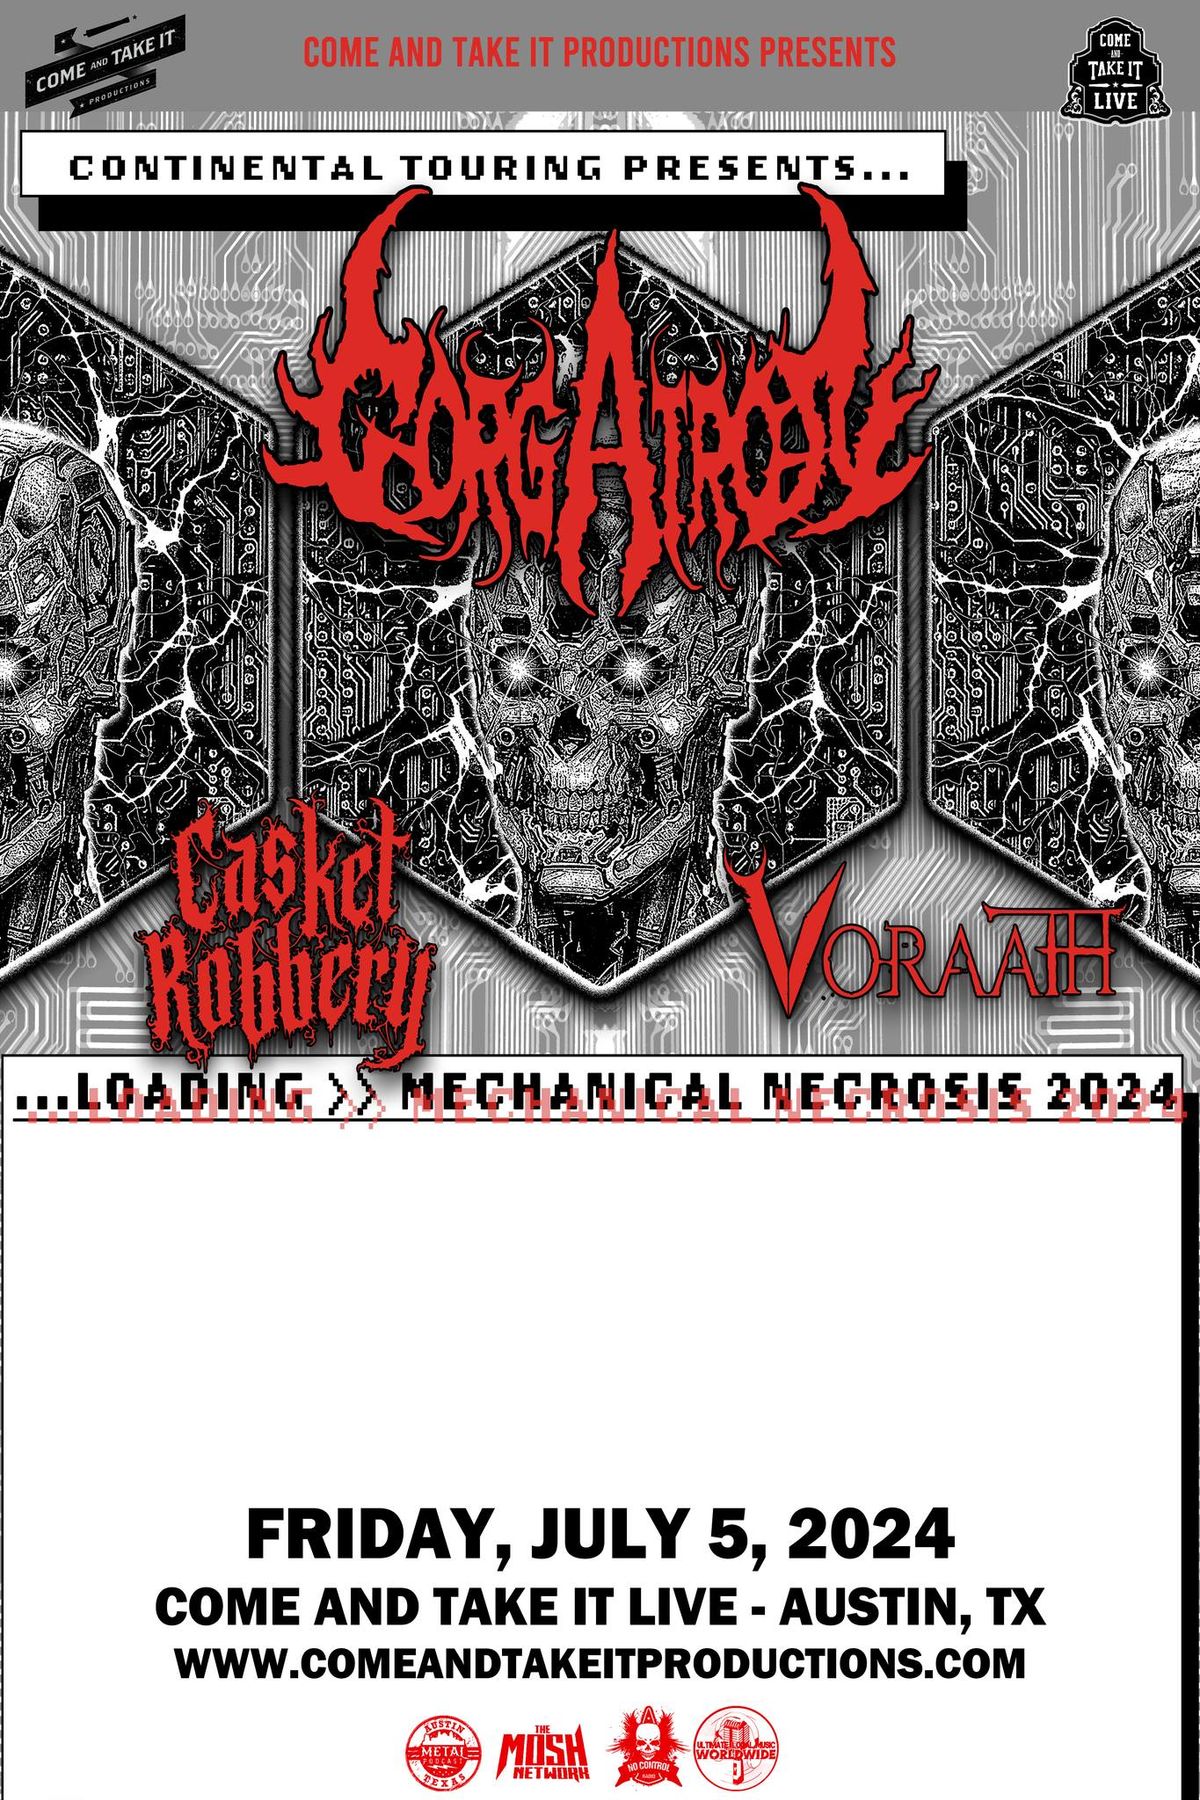 Gorgatron, Casket Robbery, Voraath and Malignant Rot at Come and Take It Live!